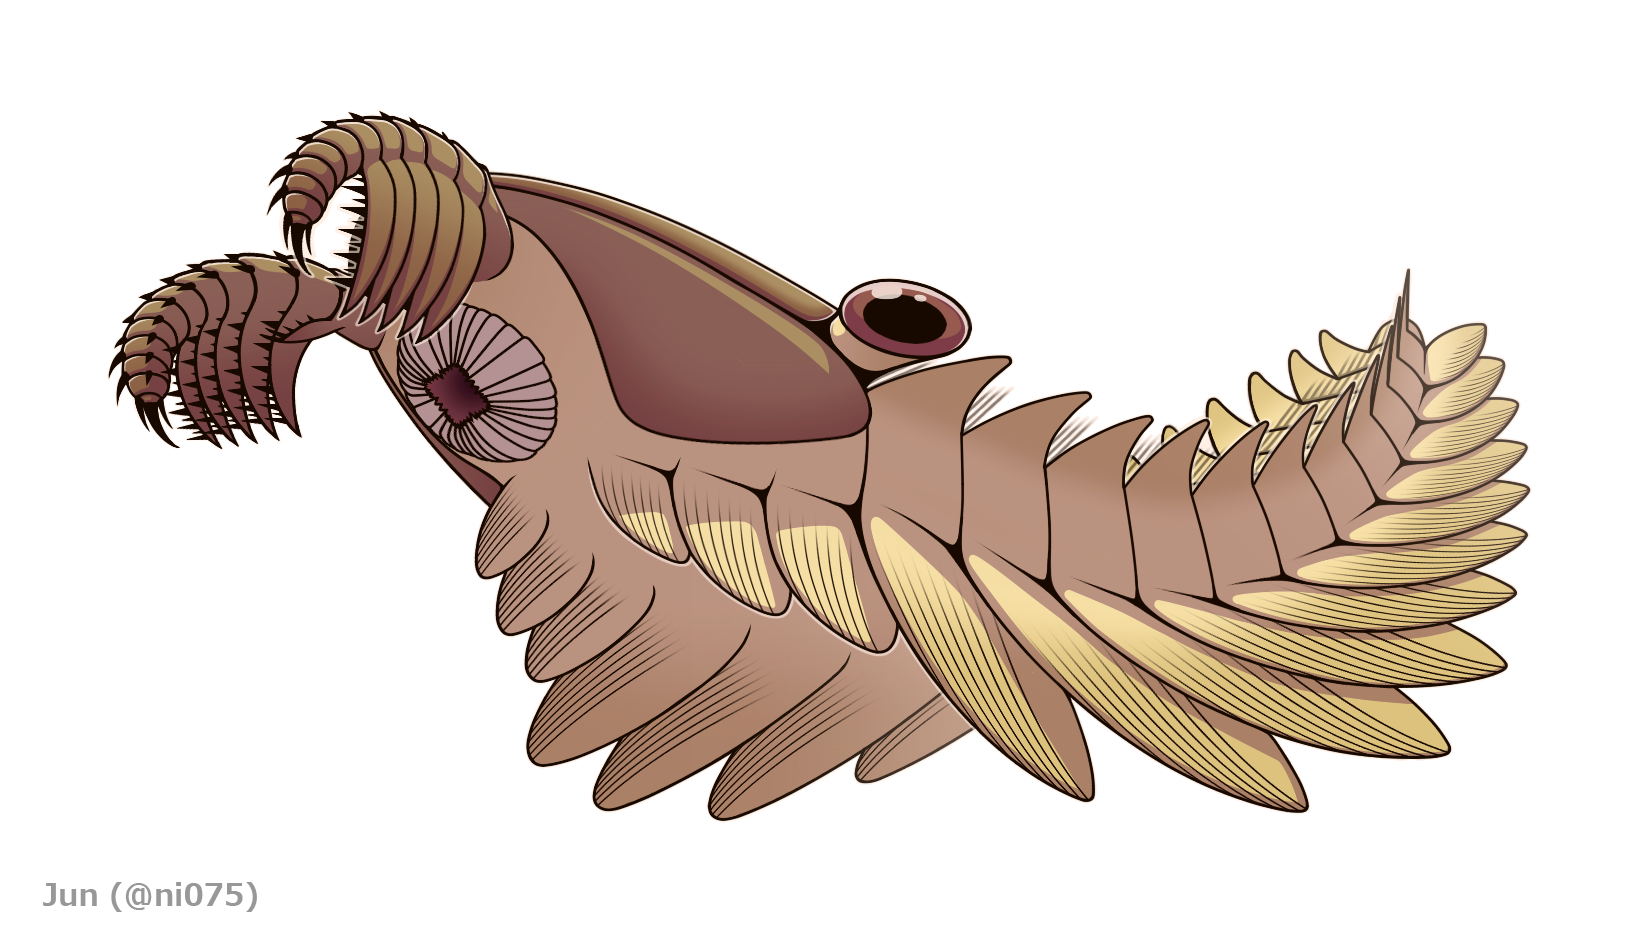 Color drawing of a radiodont from the Cambrian of Utah. The animal has a slightly elongated head with bristly appendages curving slightly downward off the front underside. Underneath the head is a round mounth-like structure. The eyes extend from the sides in the top-back of the head. The remainder of the body is made up of repeating segments, each with short spines projecting off either side towards the top and paddle-like extensions attaching off each side toward the bottom. The animal has no legs.